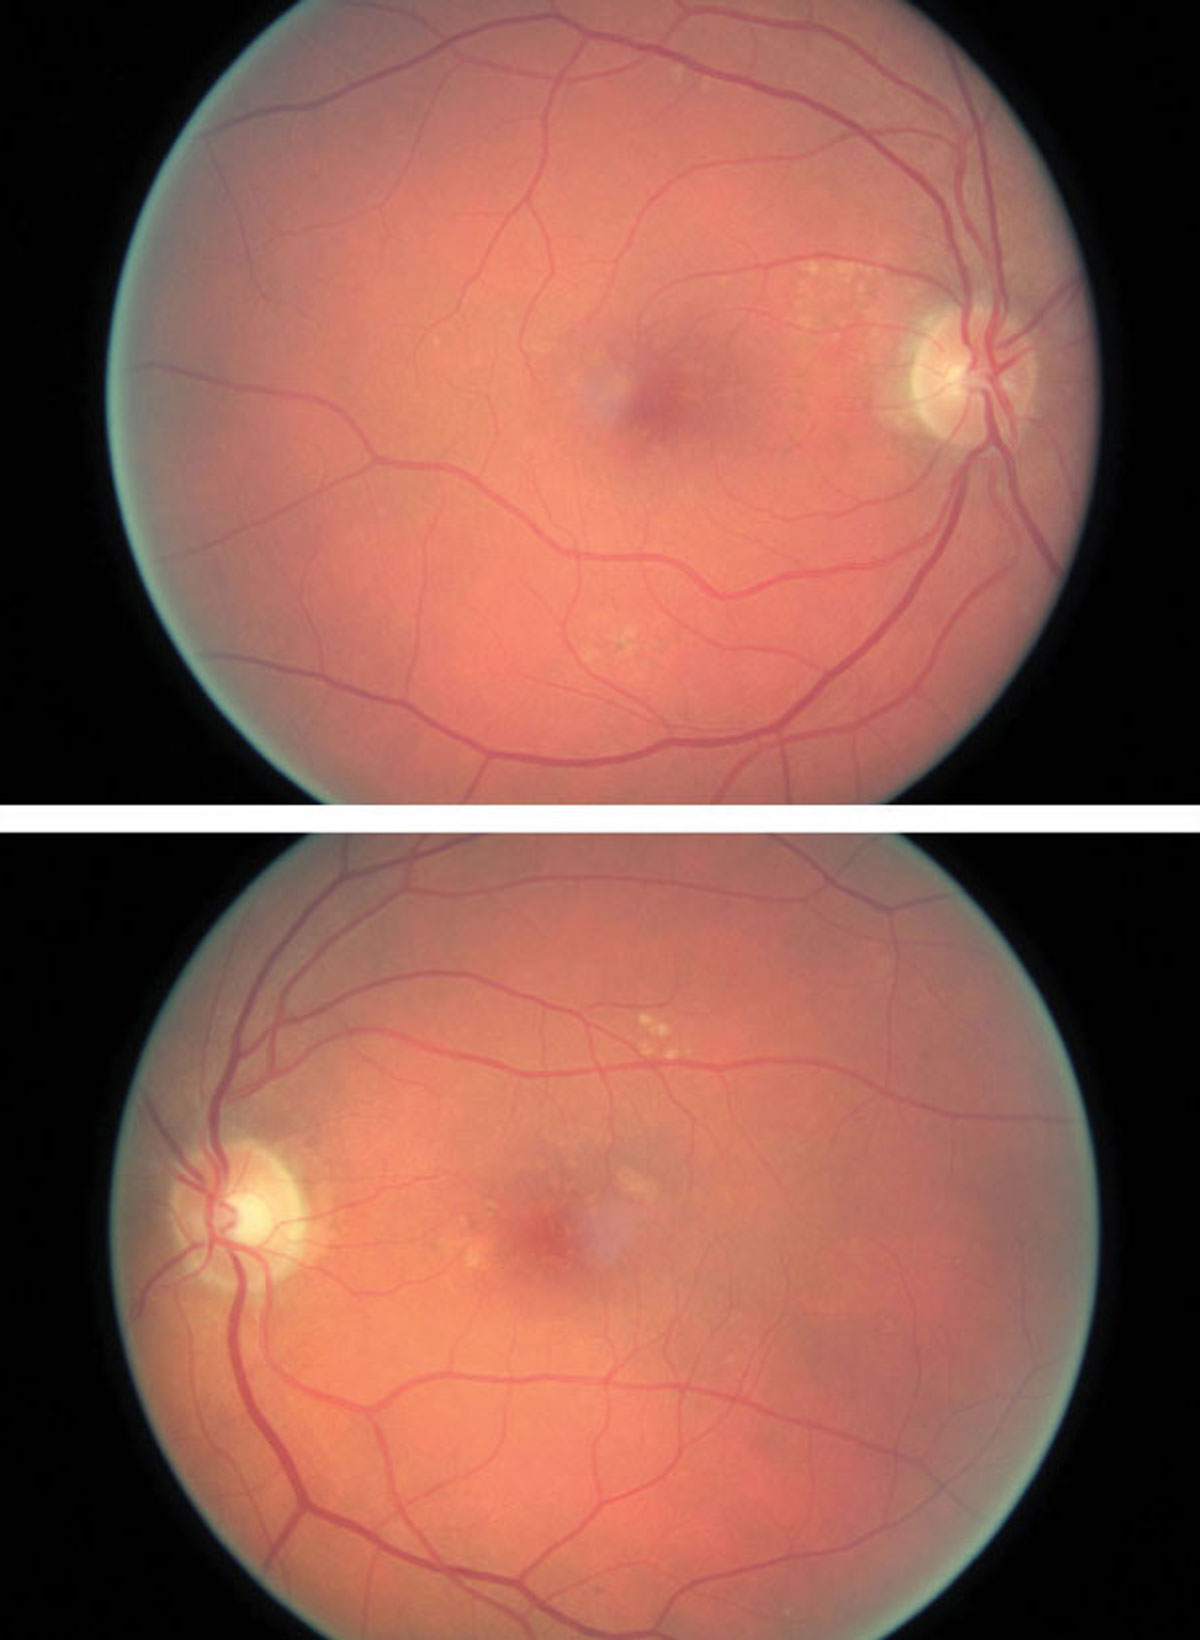 The risk of late AMD is not heightened in patients who undergo cataract surgery. Photo: Amanda Legge, OD. 